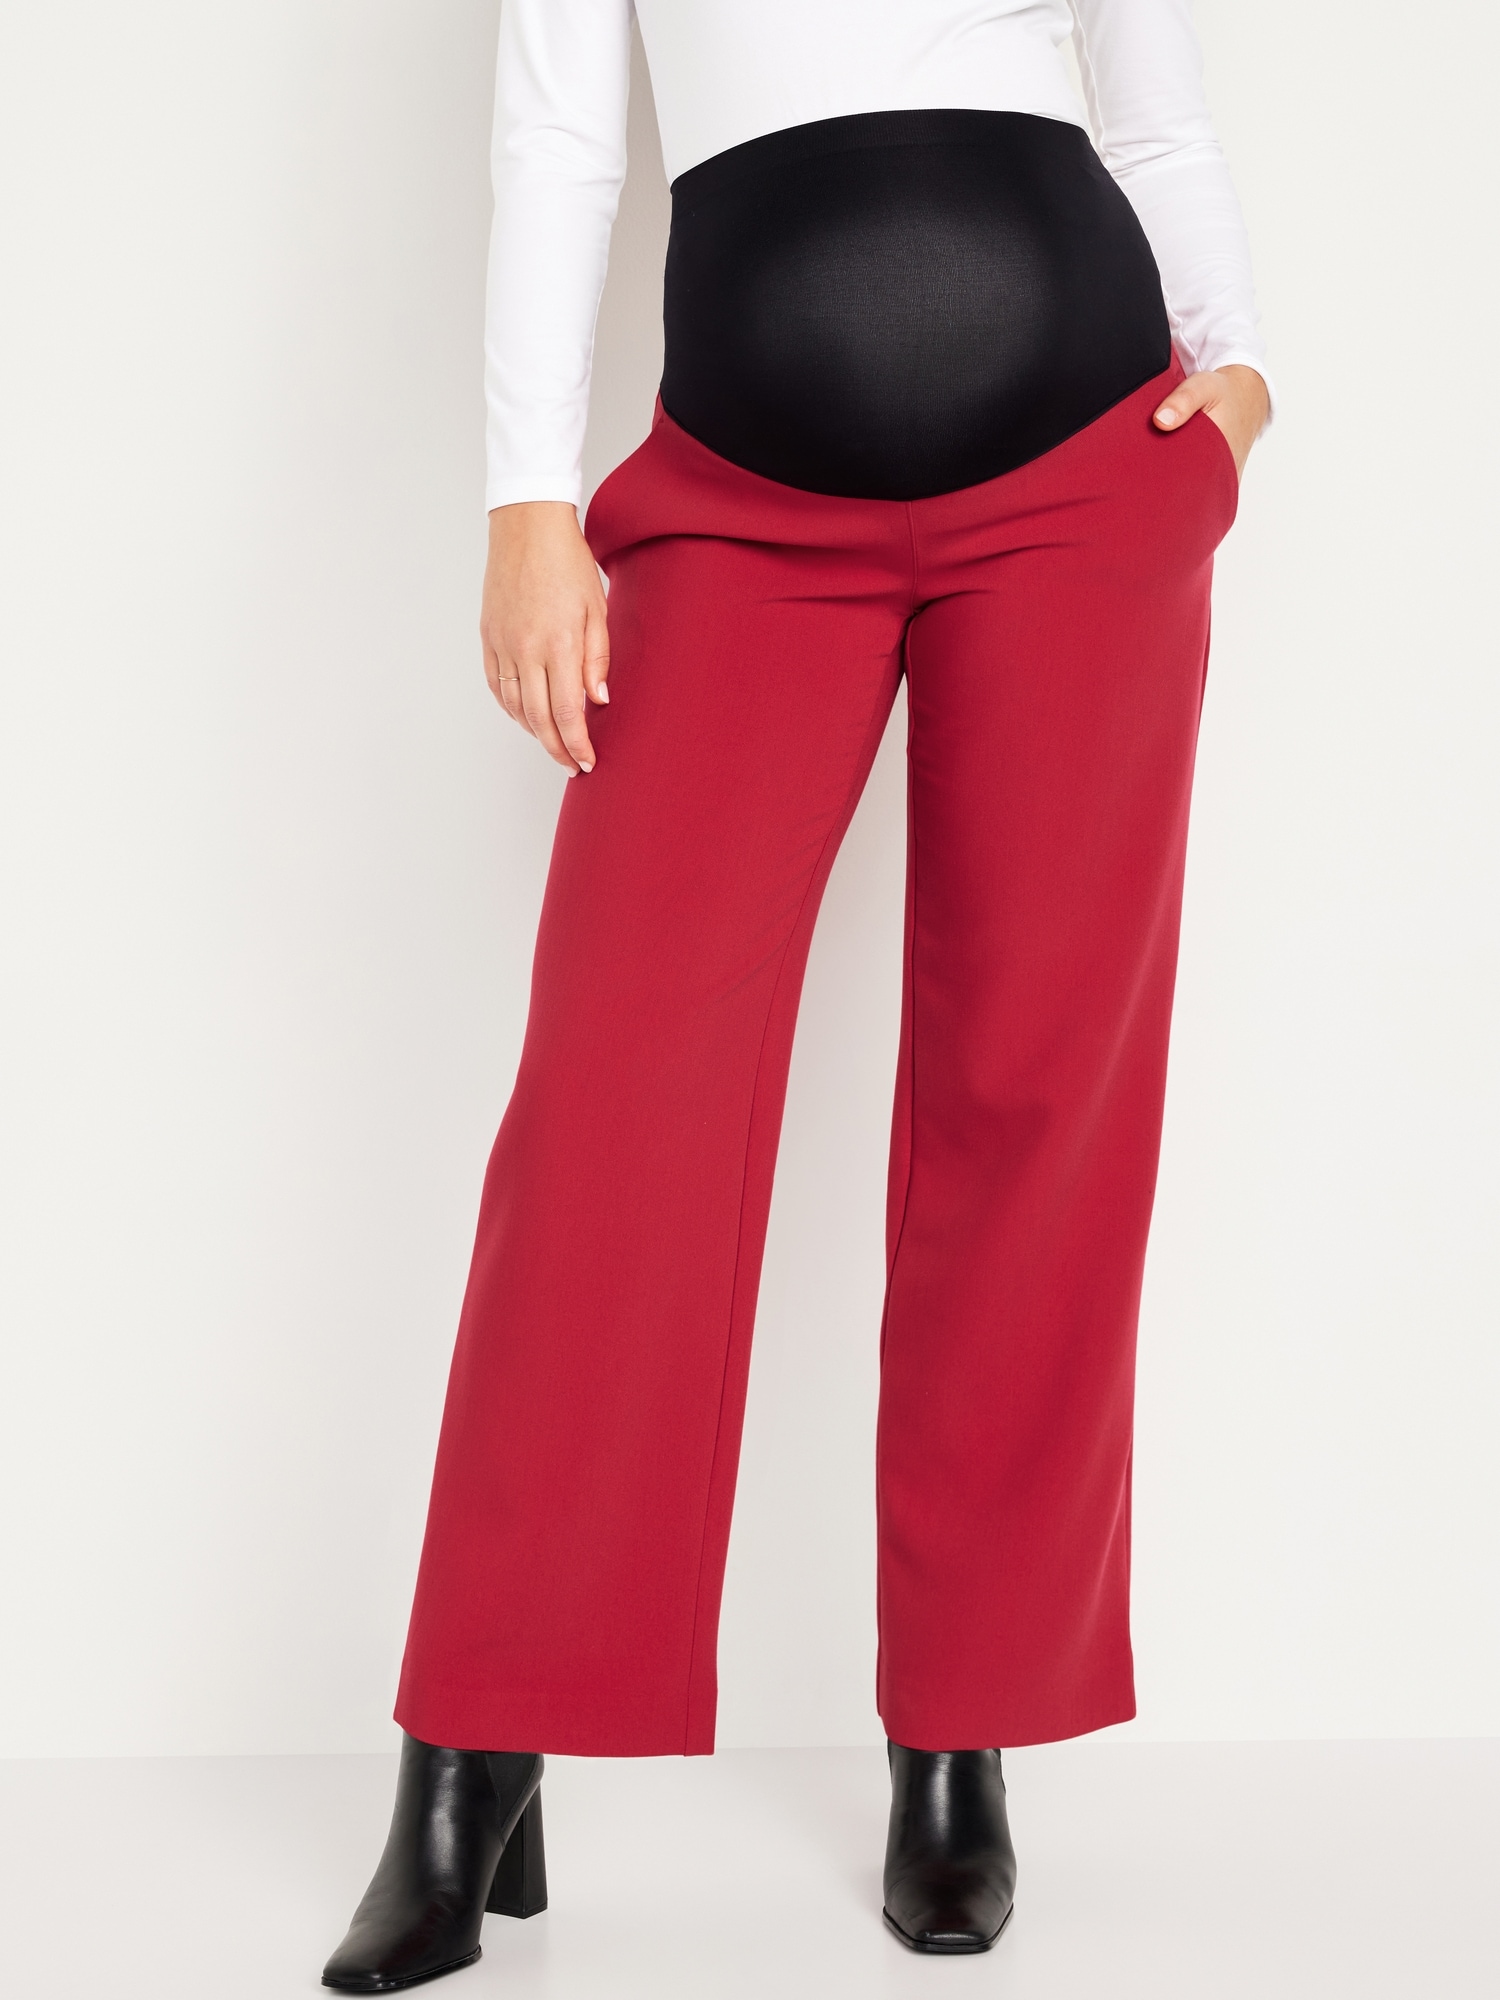 Maternity Pants: Over 219 Royalty-Free Licensable Stock